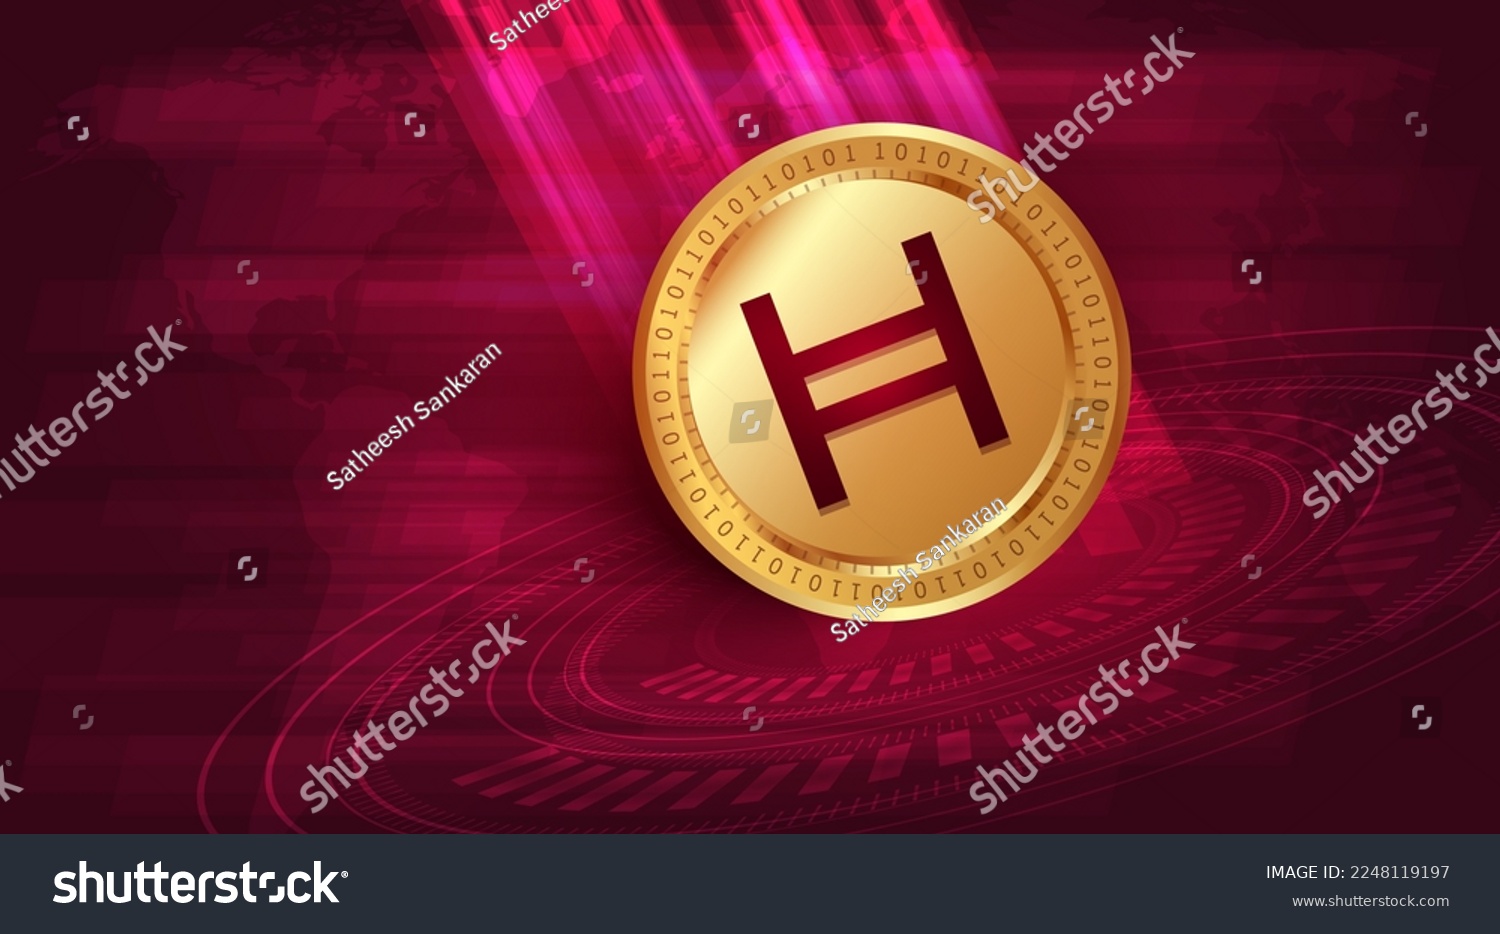 SVG of Hedera (HBAR) crypto currency banner and background svg